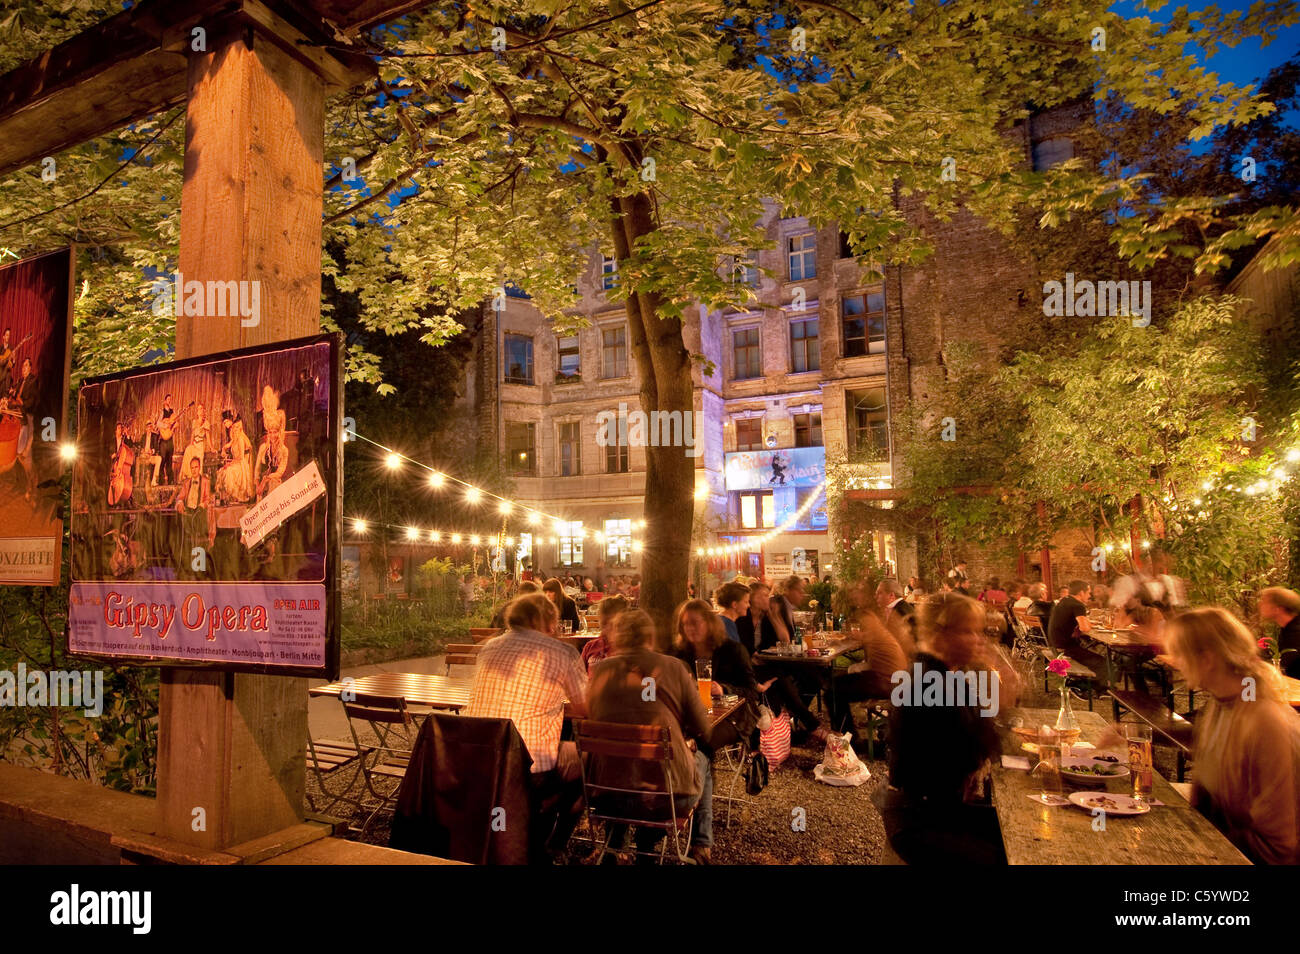 Beer garden at Claerchens Ballhaus, famous traditional dance hall and remaining ballroom of the 1920s, Berlin, Germany, Europe Stock Photo